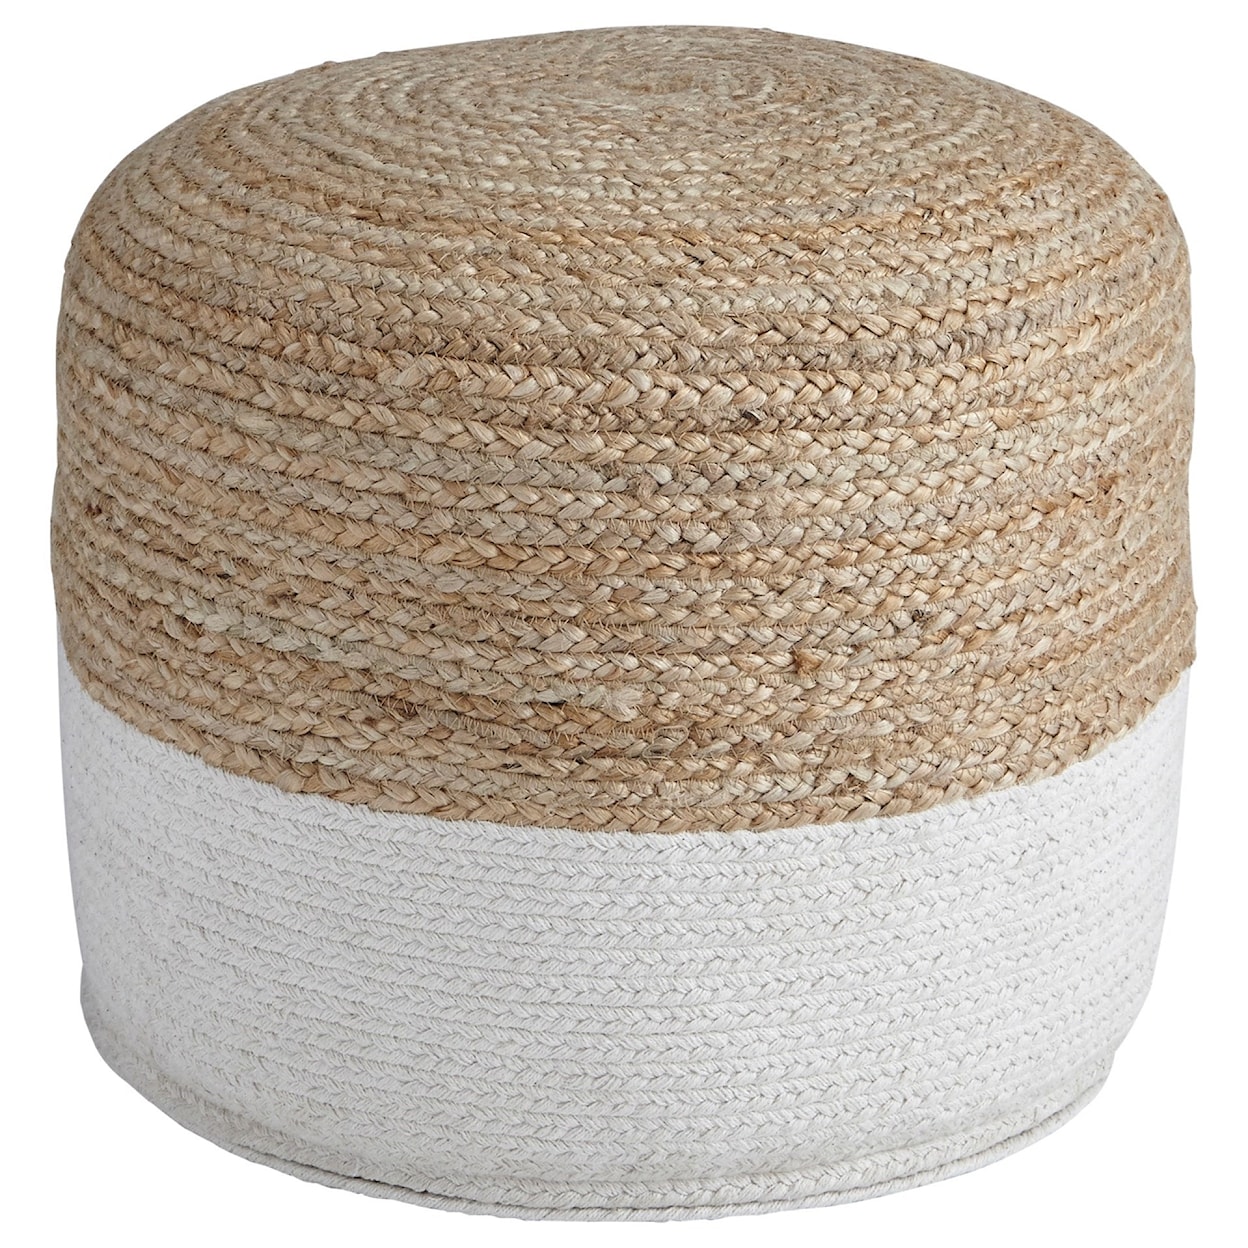 Benchcraft Poufs Sweed Valley - Natural/White Pouf